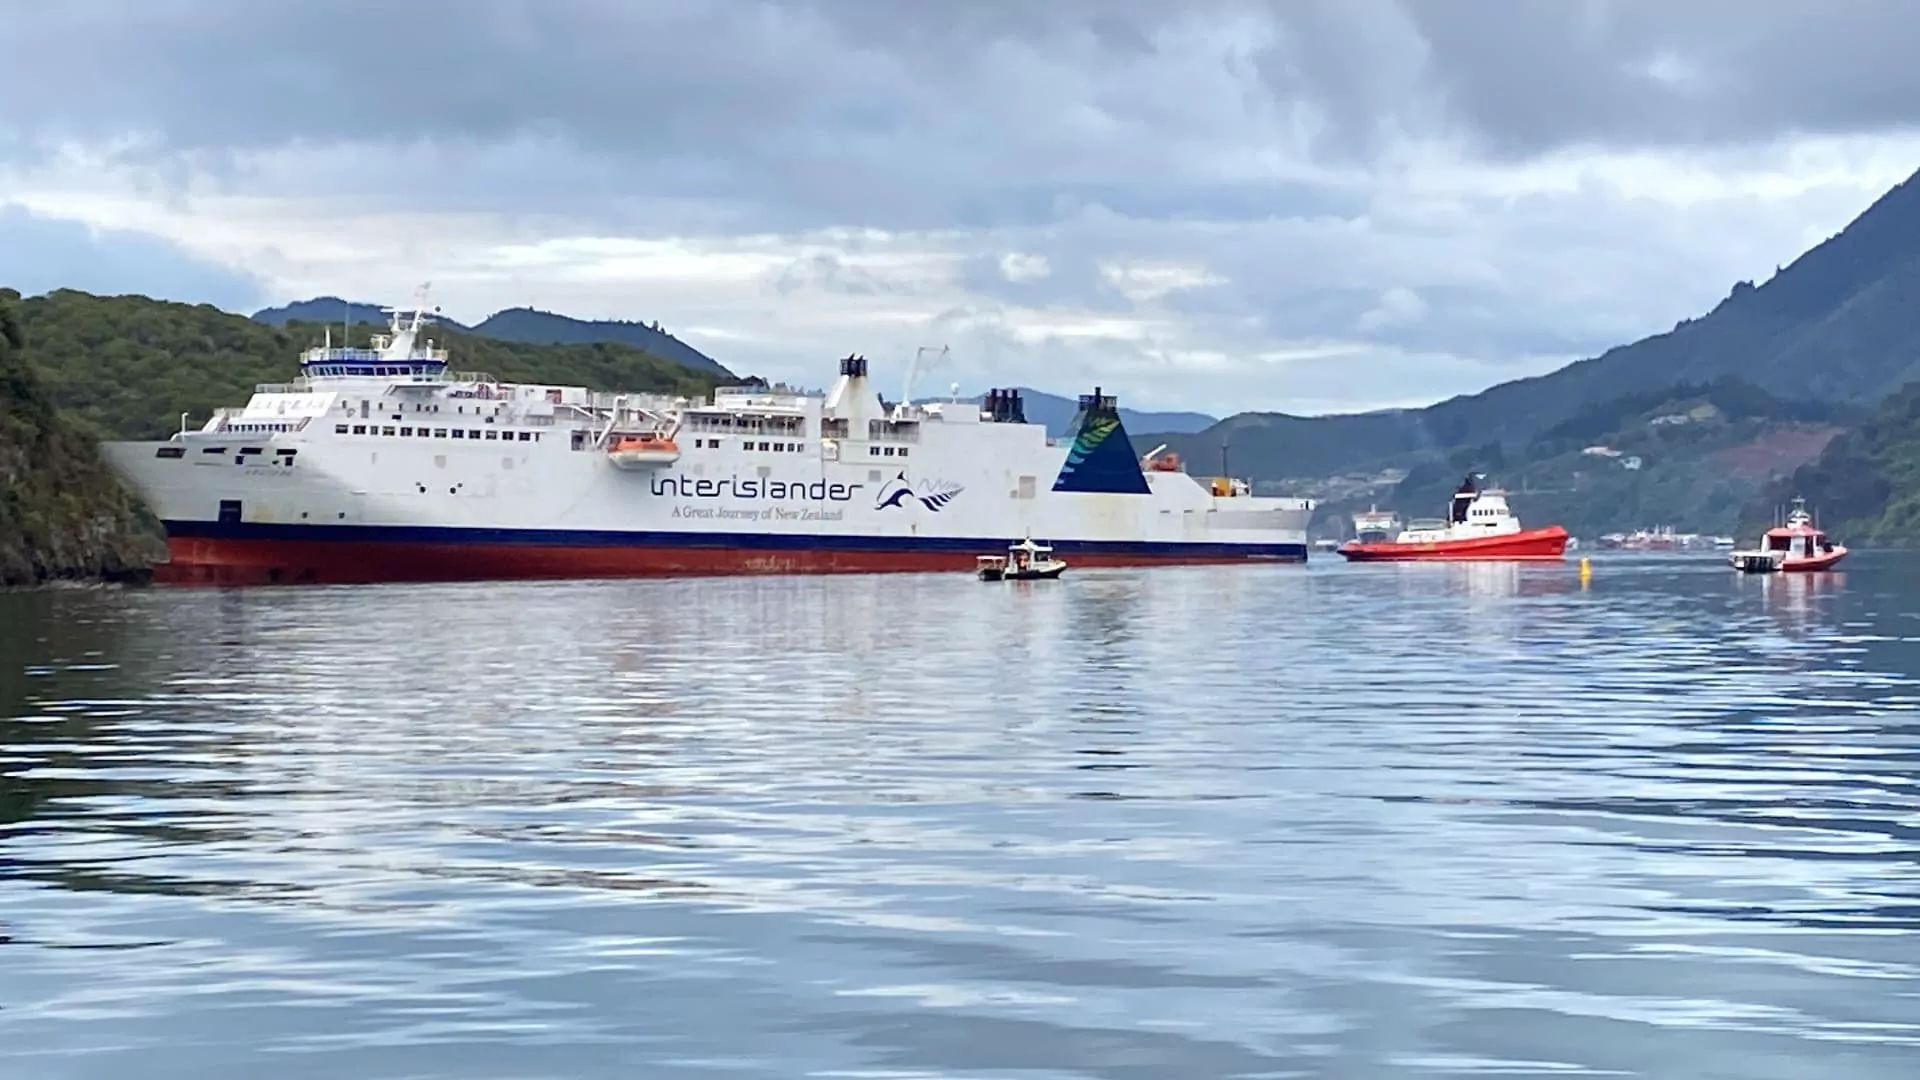 Refloating of ferry delayed